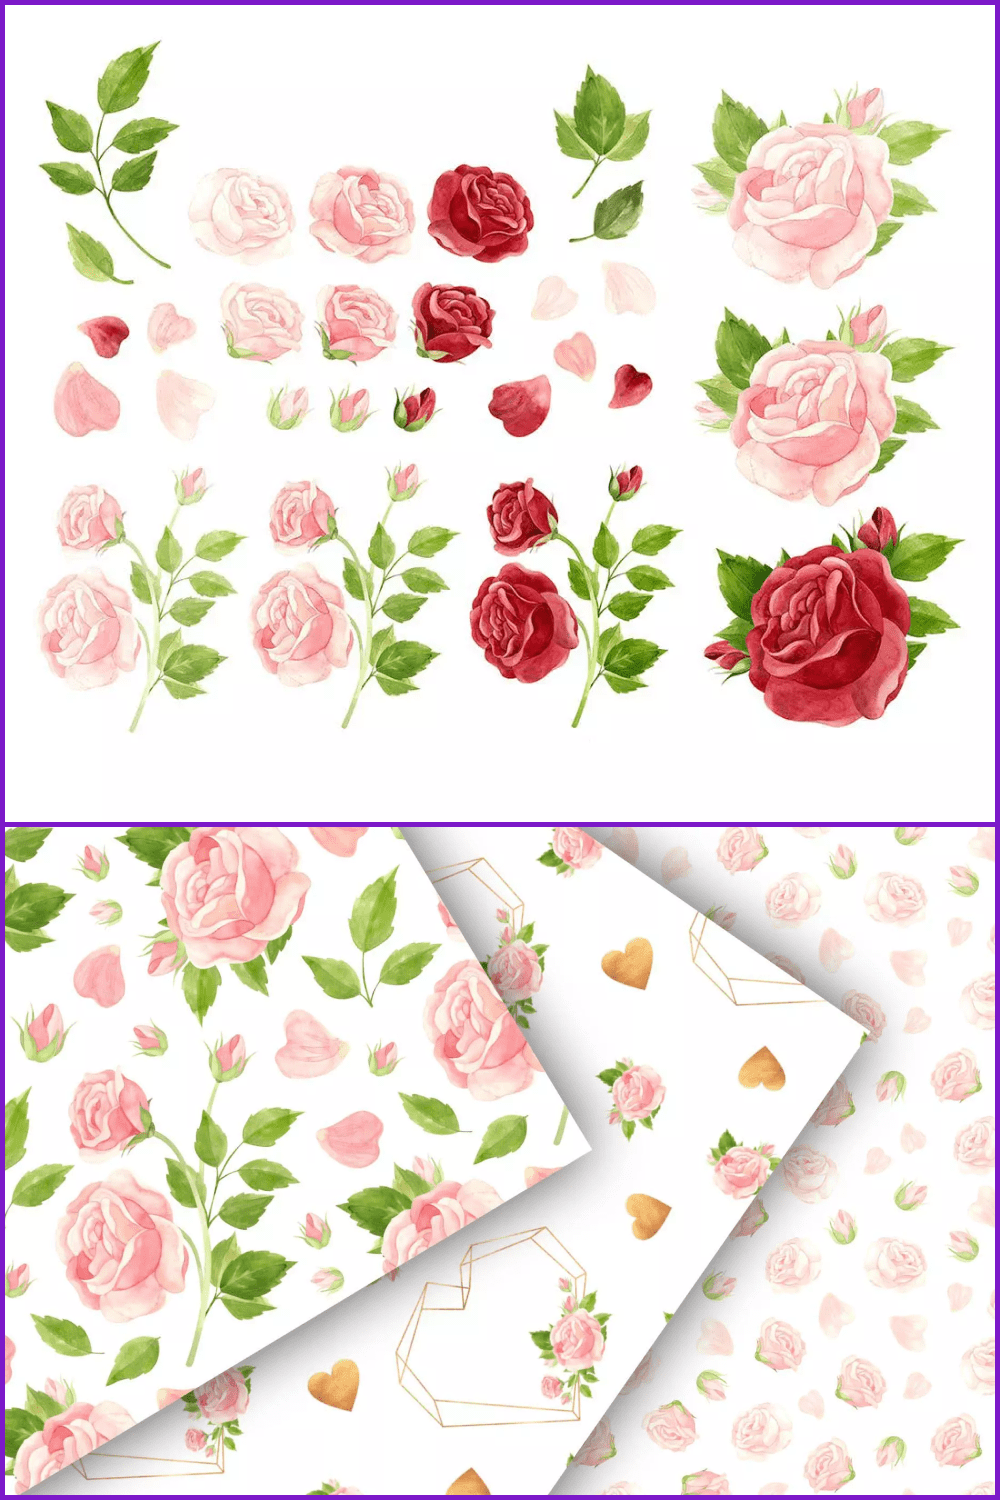 Red and pink roses with green leafs on the paper.